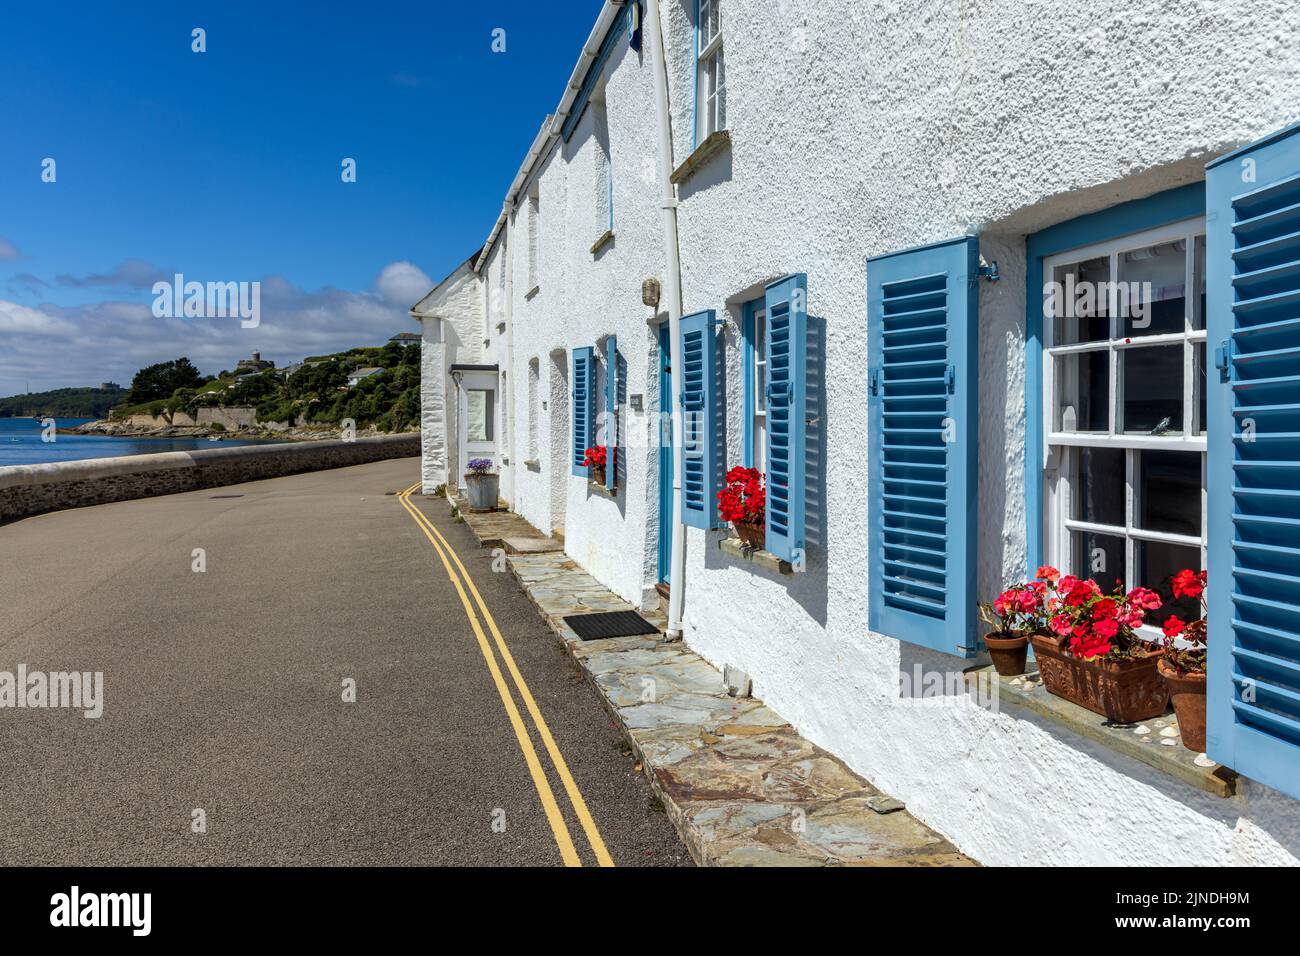 Blue shutters on windows of old fishermens cottages facing the sea in St Mawes, Cornwall, England. Stock Photo